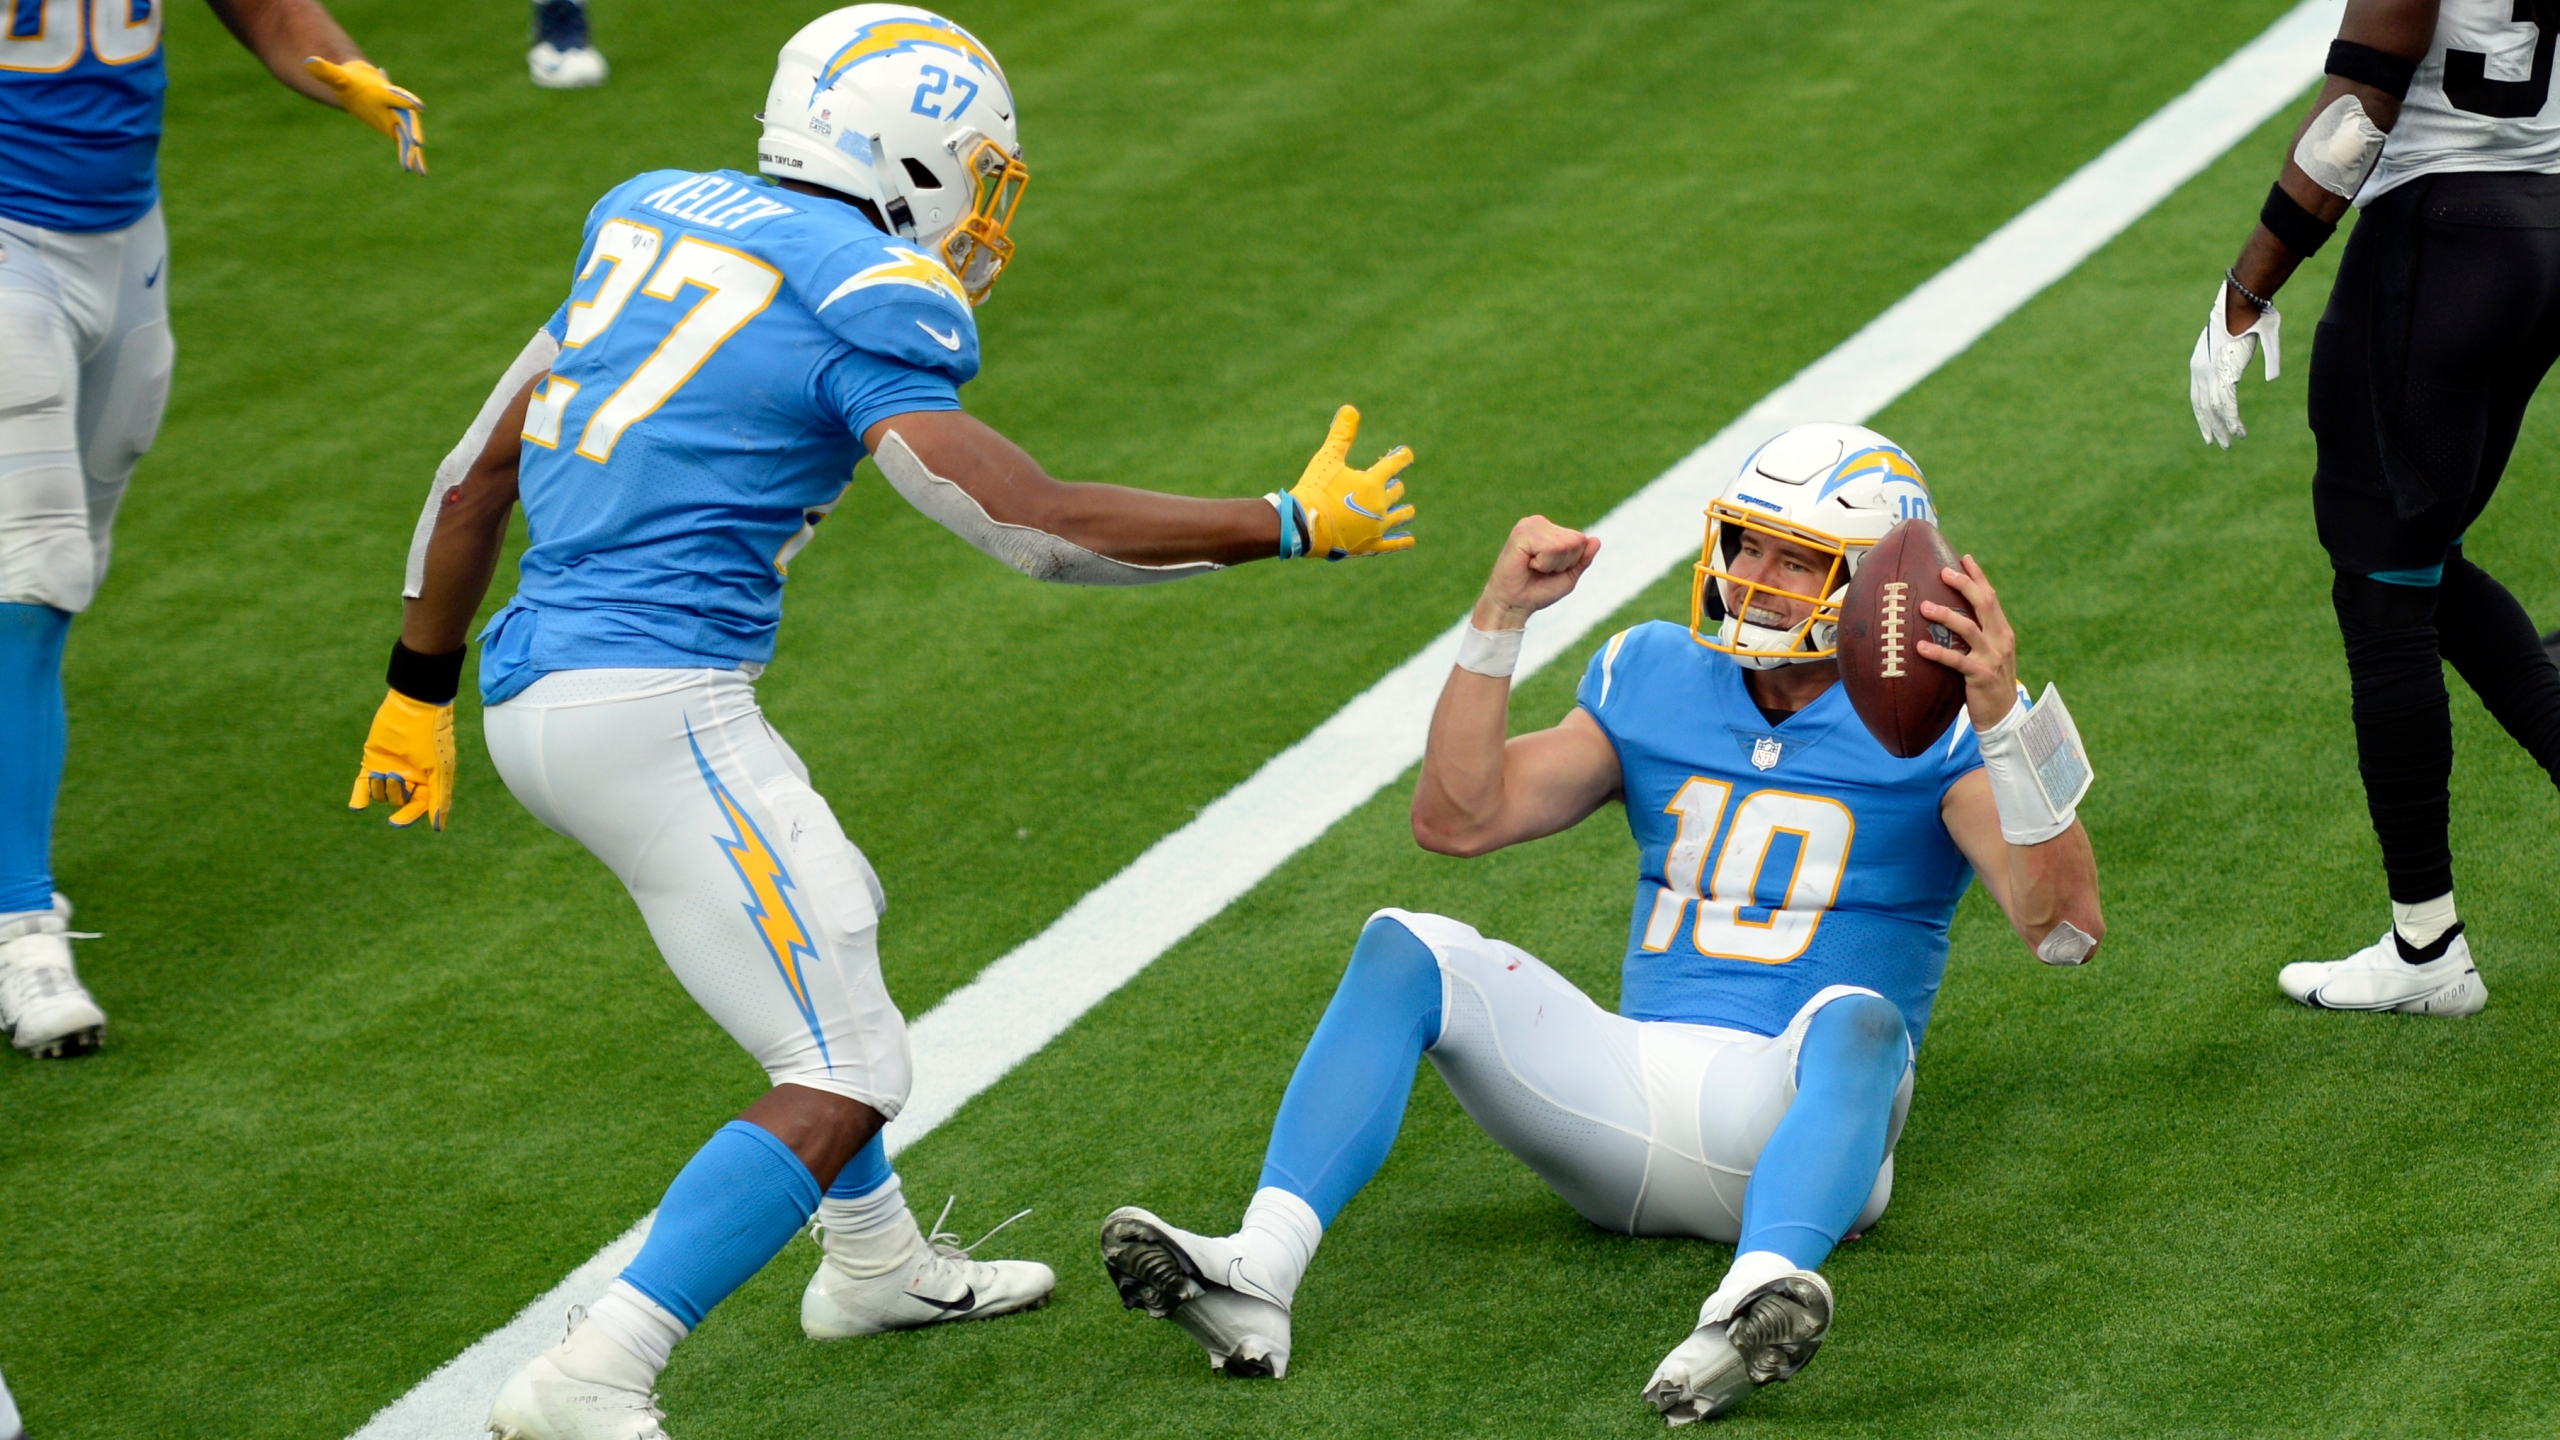 Herbert Leads Chargers To 39 29 Victory Over Jaguars. WJHL. Tri Cities News & Weather